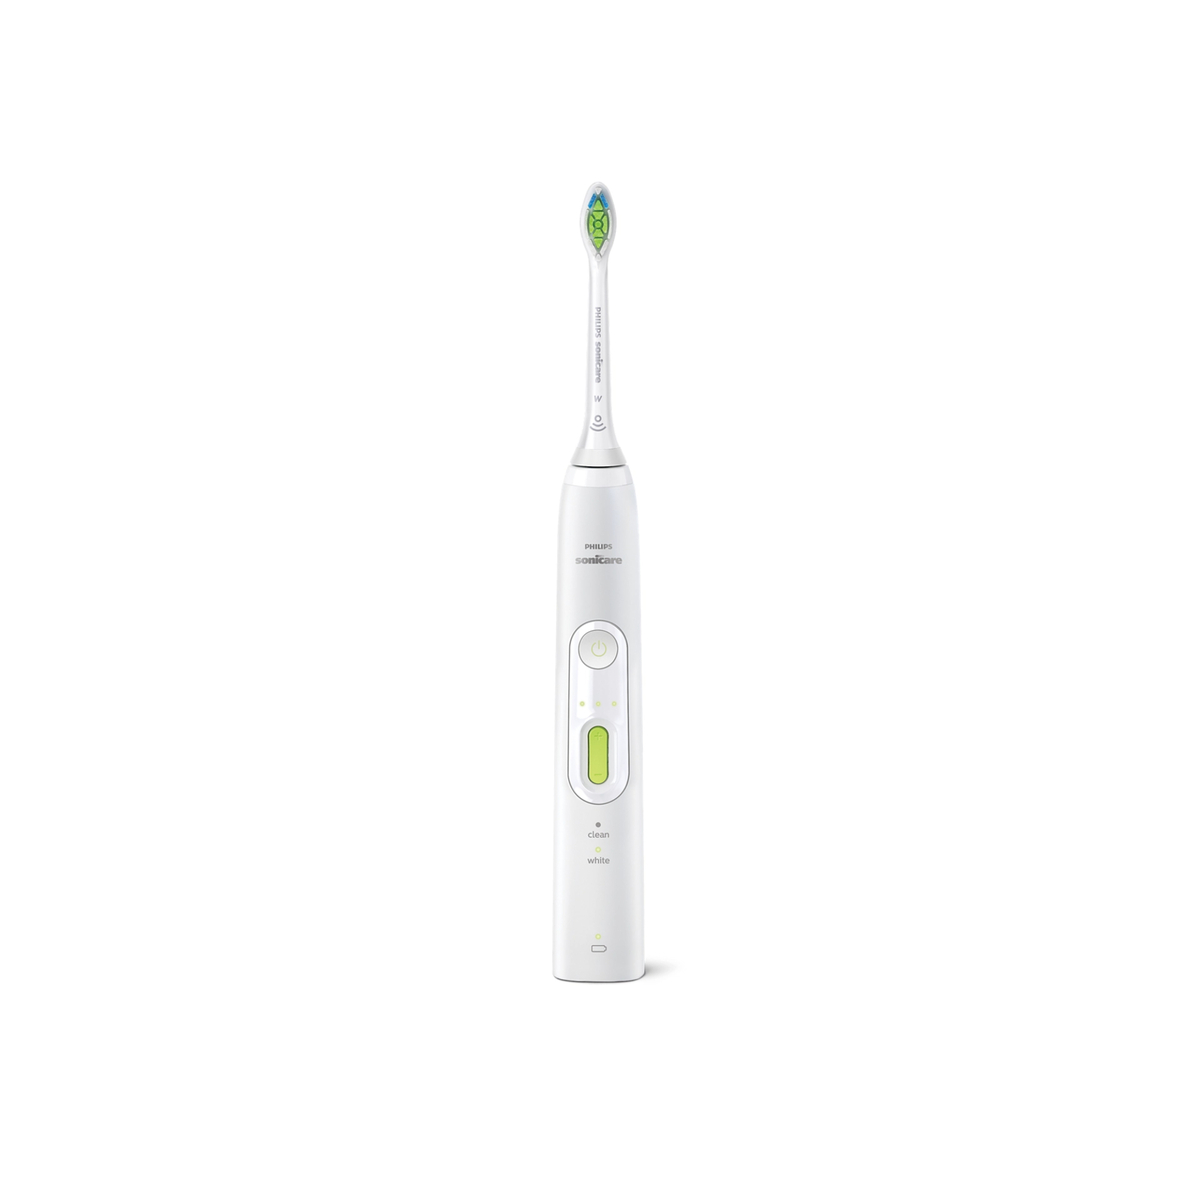 Philips Sonicare HealthyWhite+ Sonic Electric Toothbrush, Frost White, HX8911/02